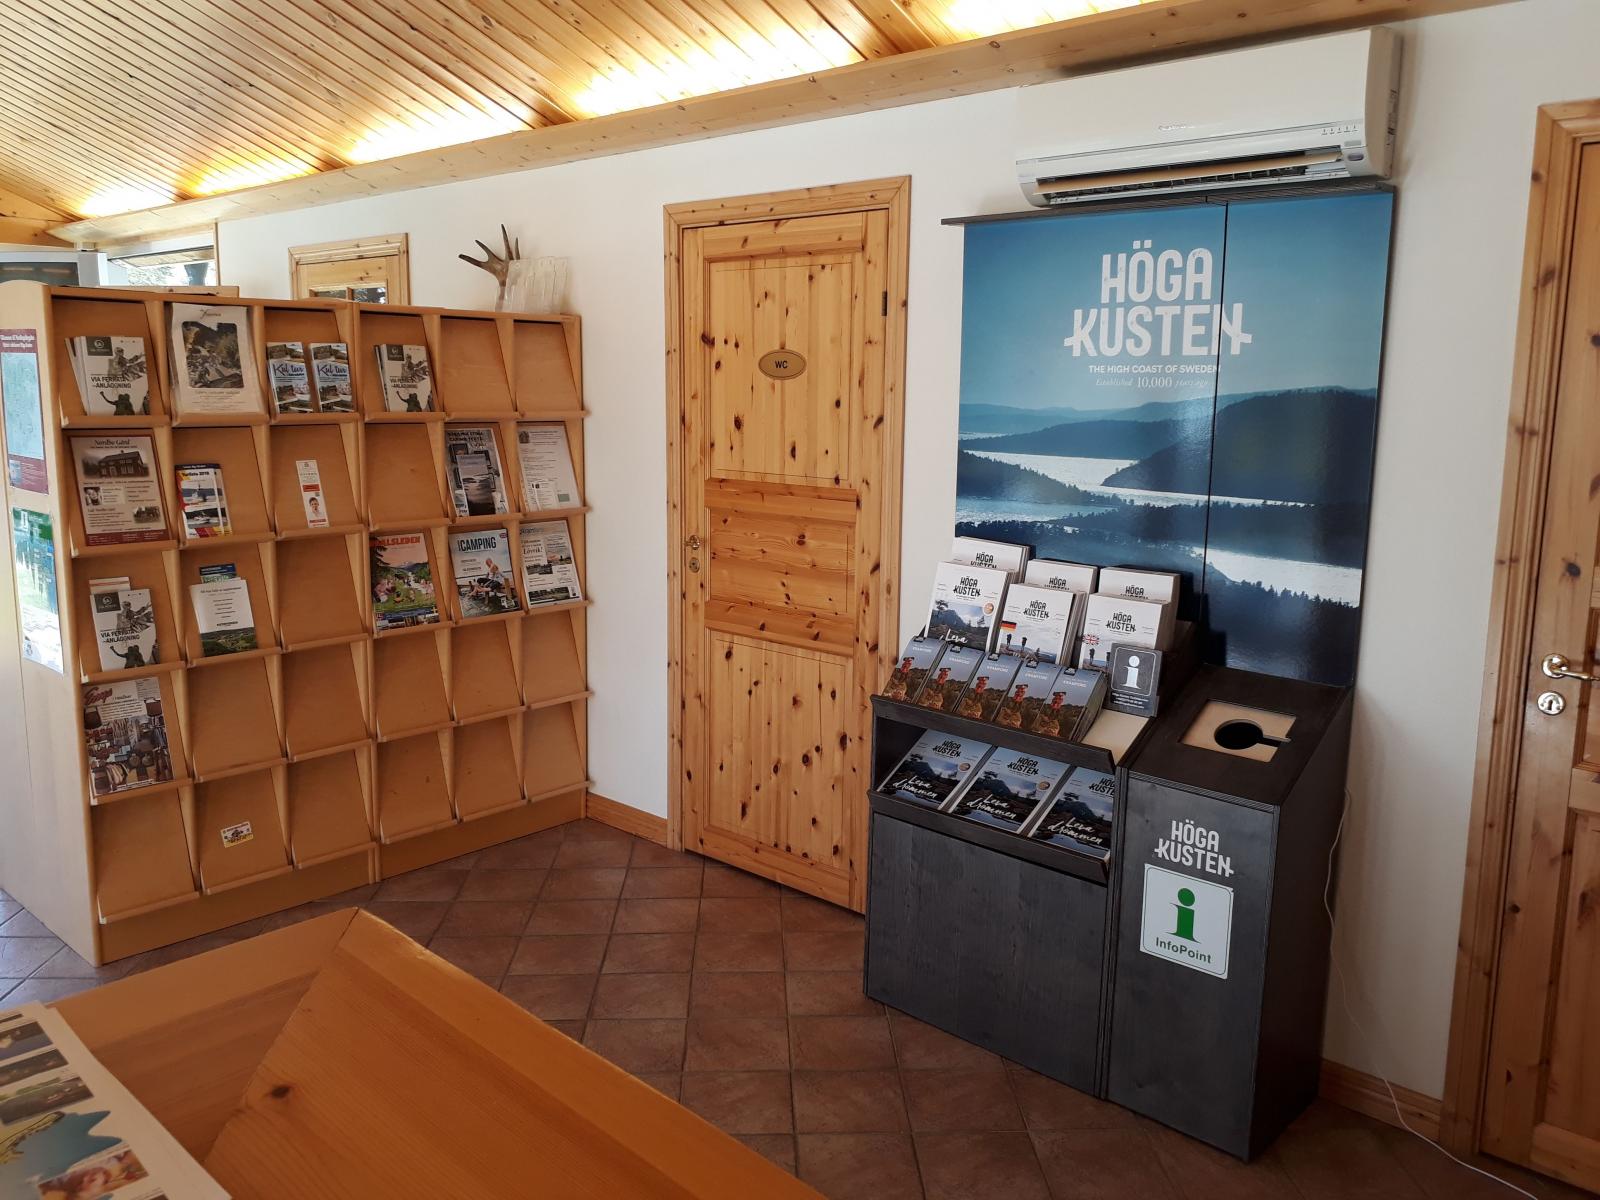 InfoPoint Norrfällsvikens Camping & Stugby